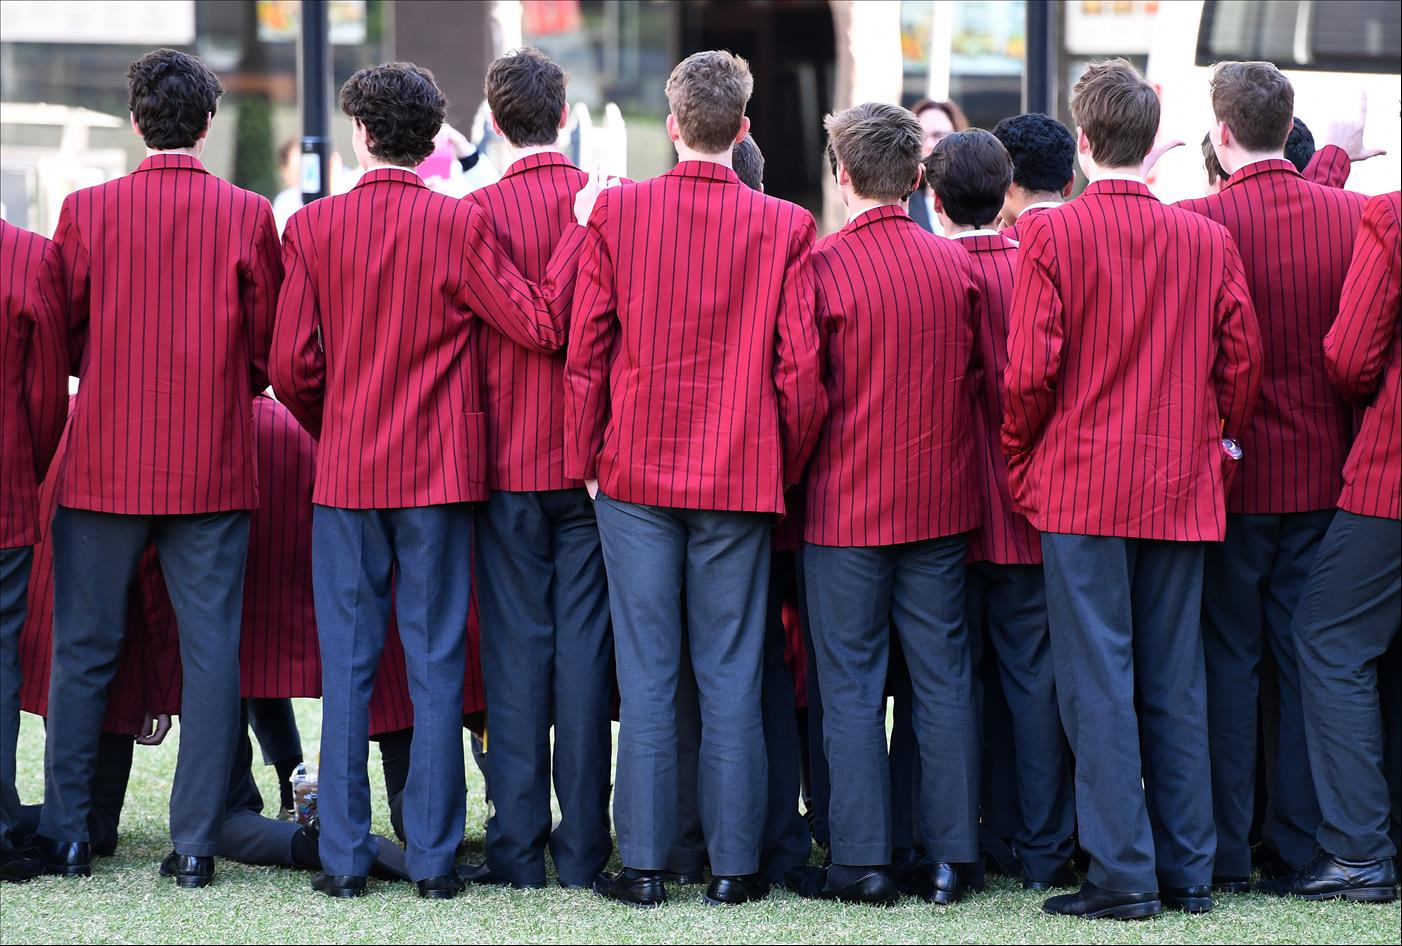 Australian Private High School Enrolments Have Jumped 70% Since 2012